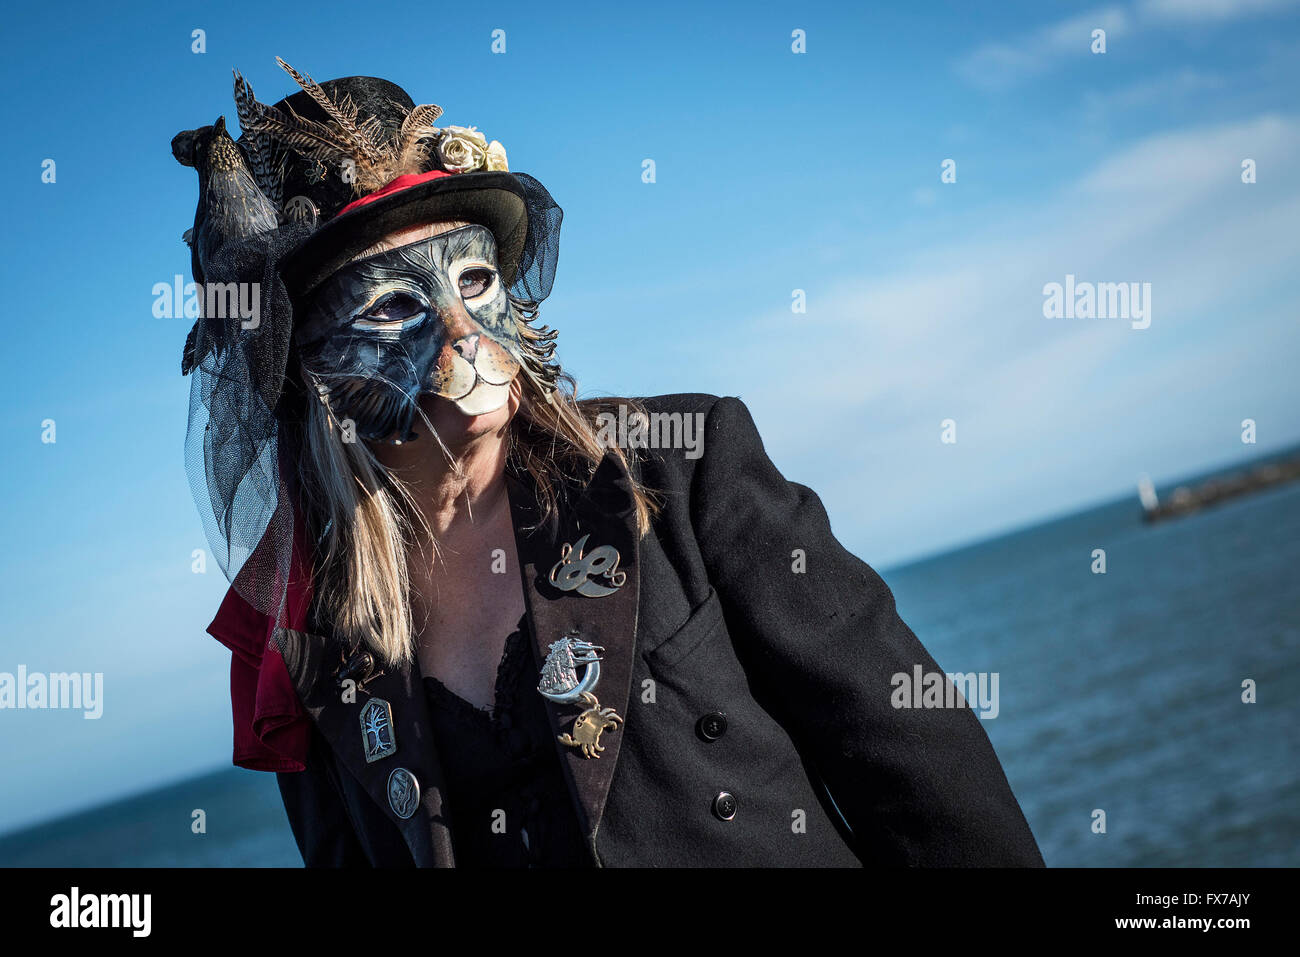 A masked guiser. Stock Photo